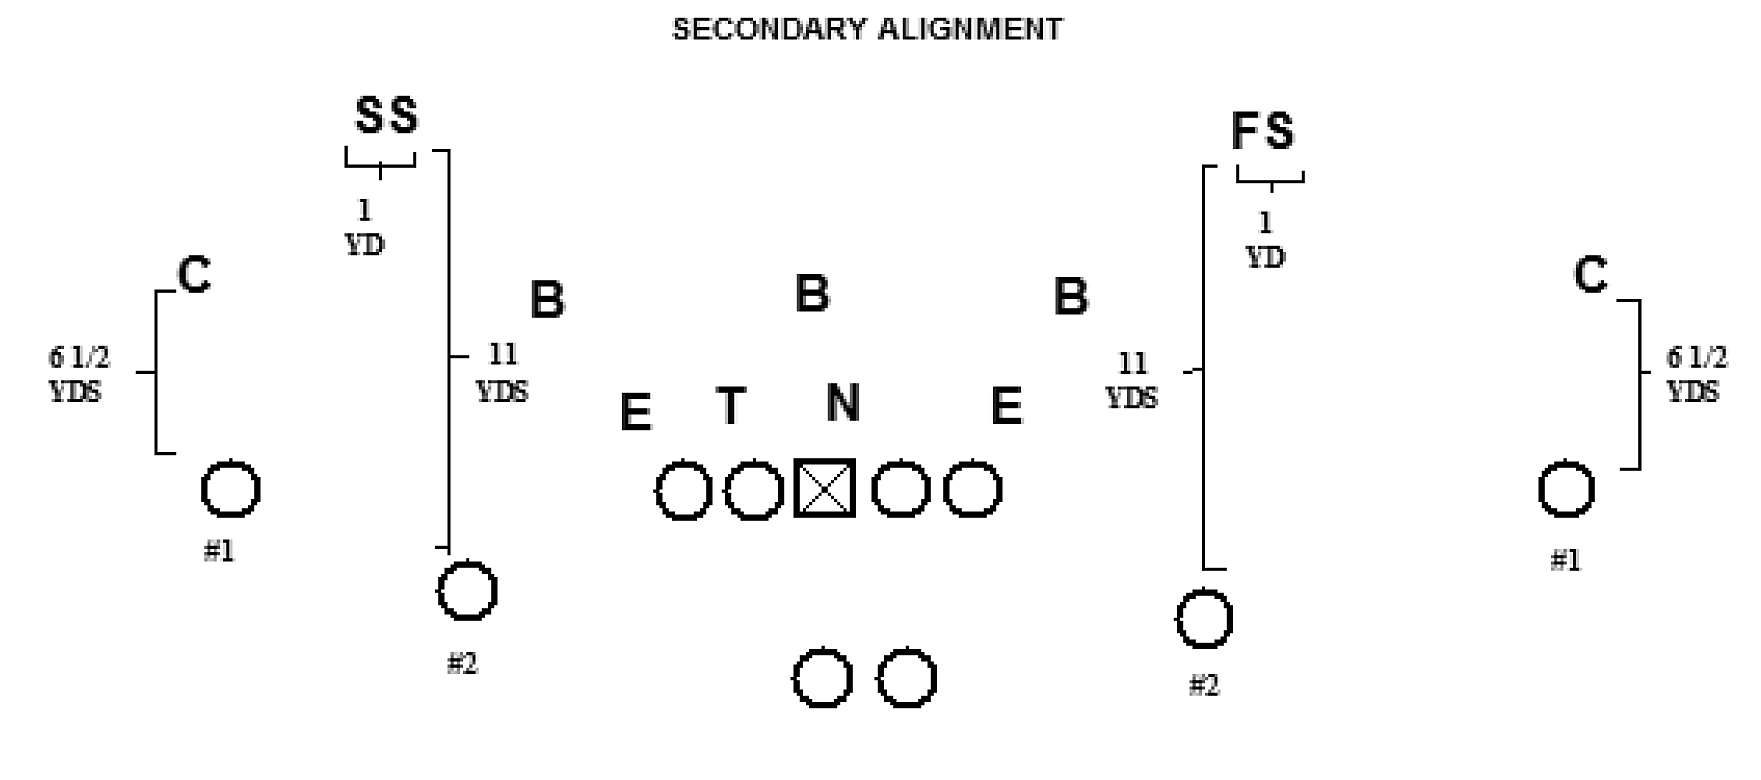 Different Looks from the 4-3 Defensive Scheme - To be effective as a